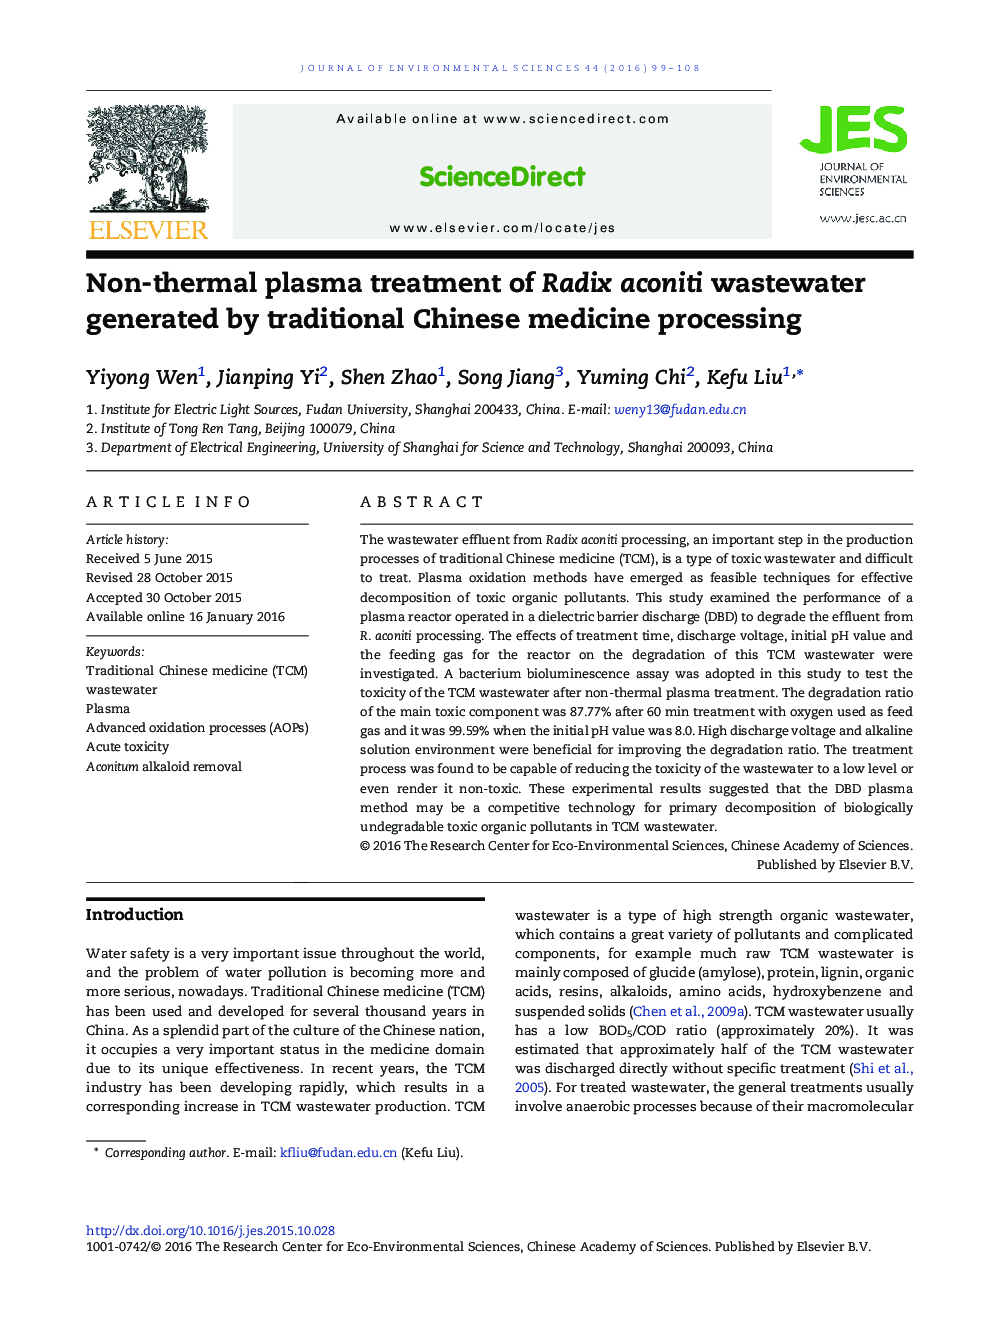 Non-thermal plasma treatment of Radix aconiti wastewater generated by traditional Chinese medicine processing